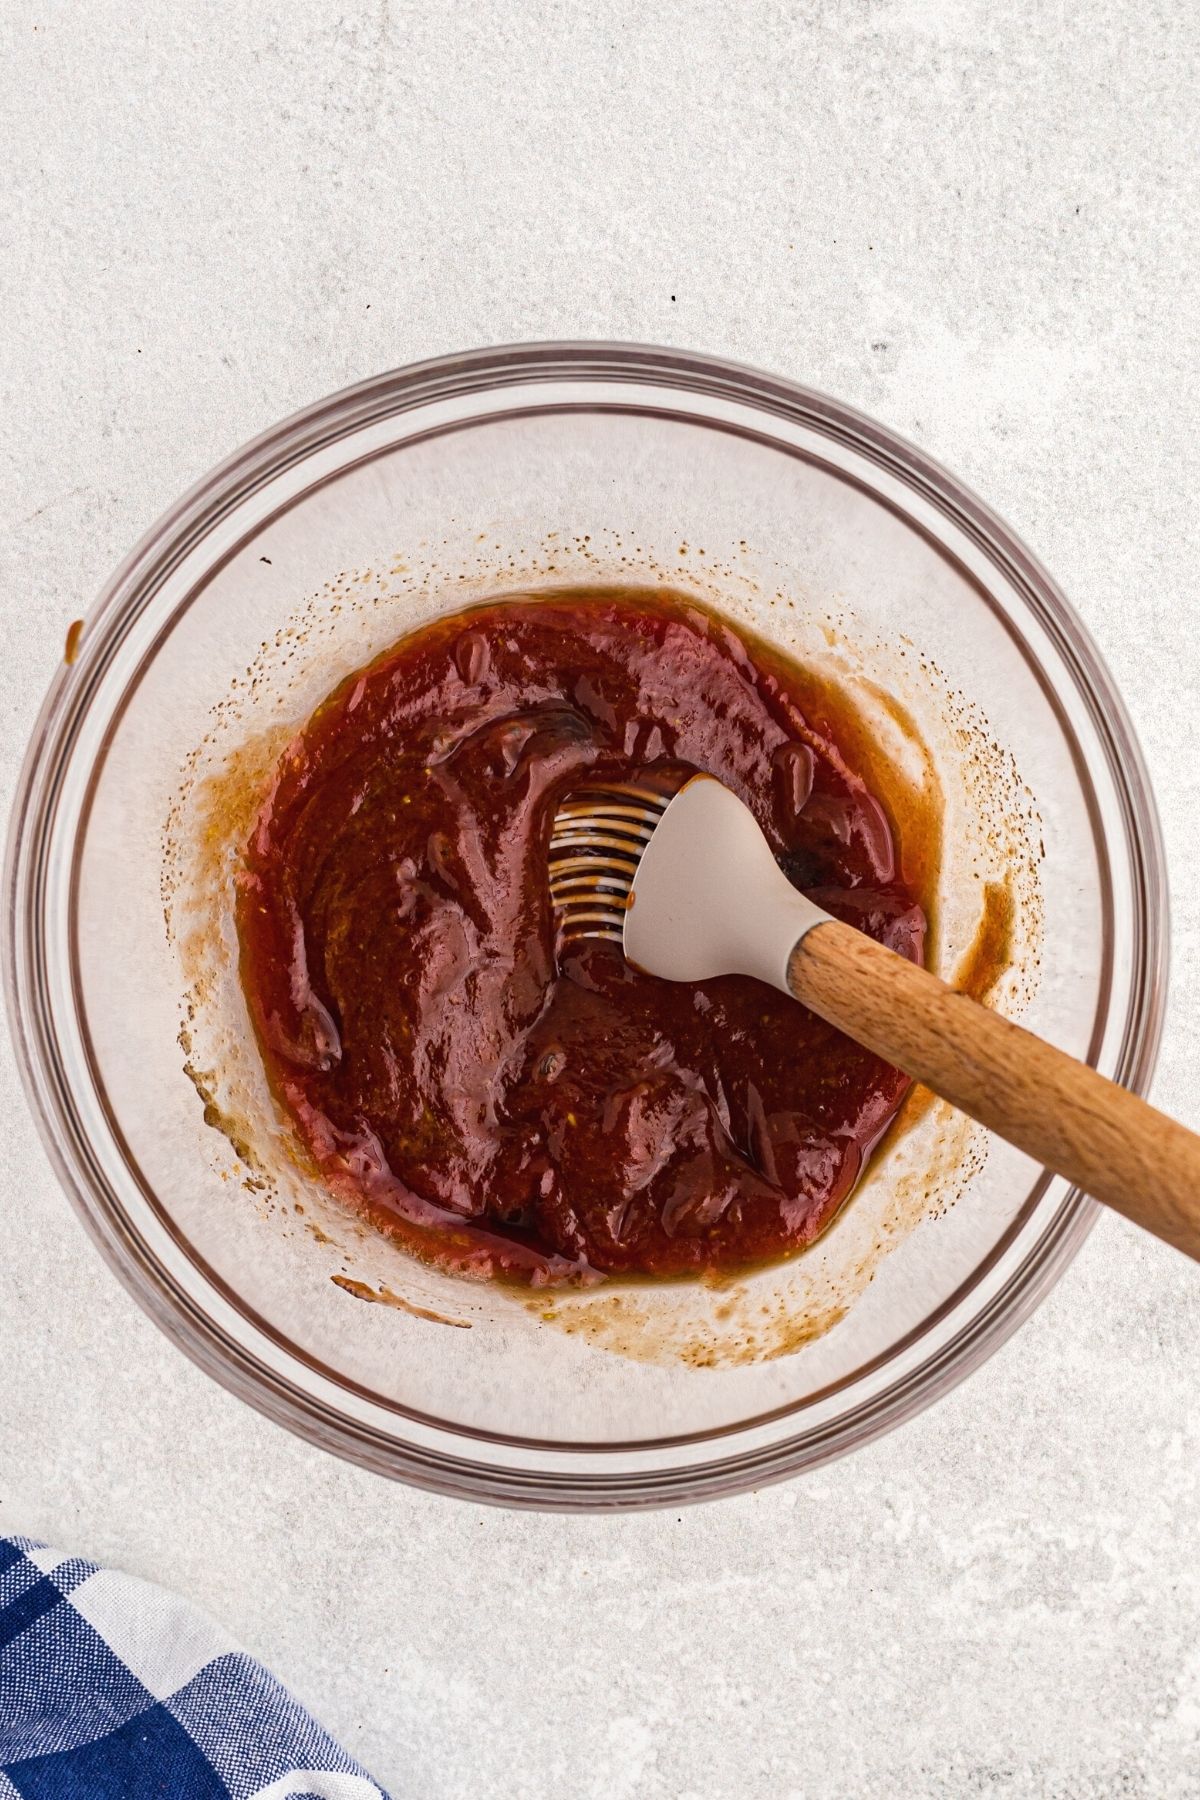 Sauce toppings of ketchup, mustard, and Worchester sauce mixed together